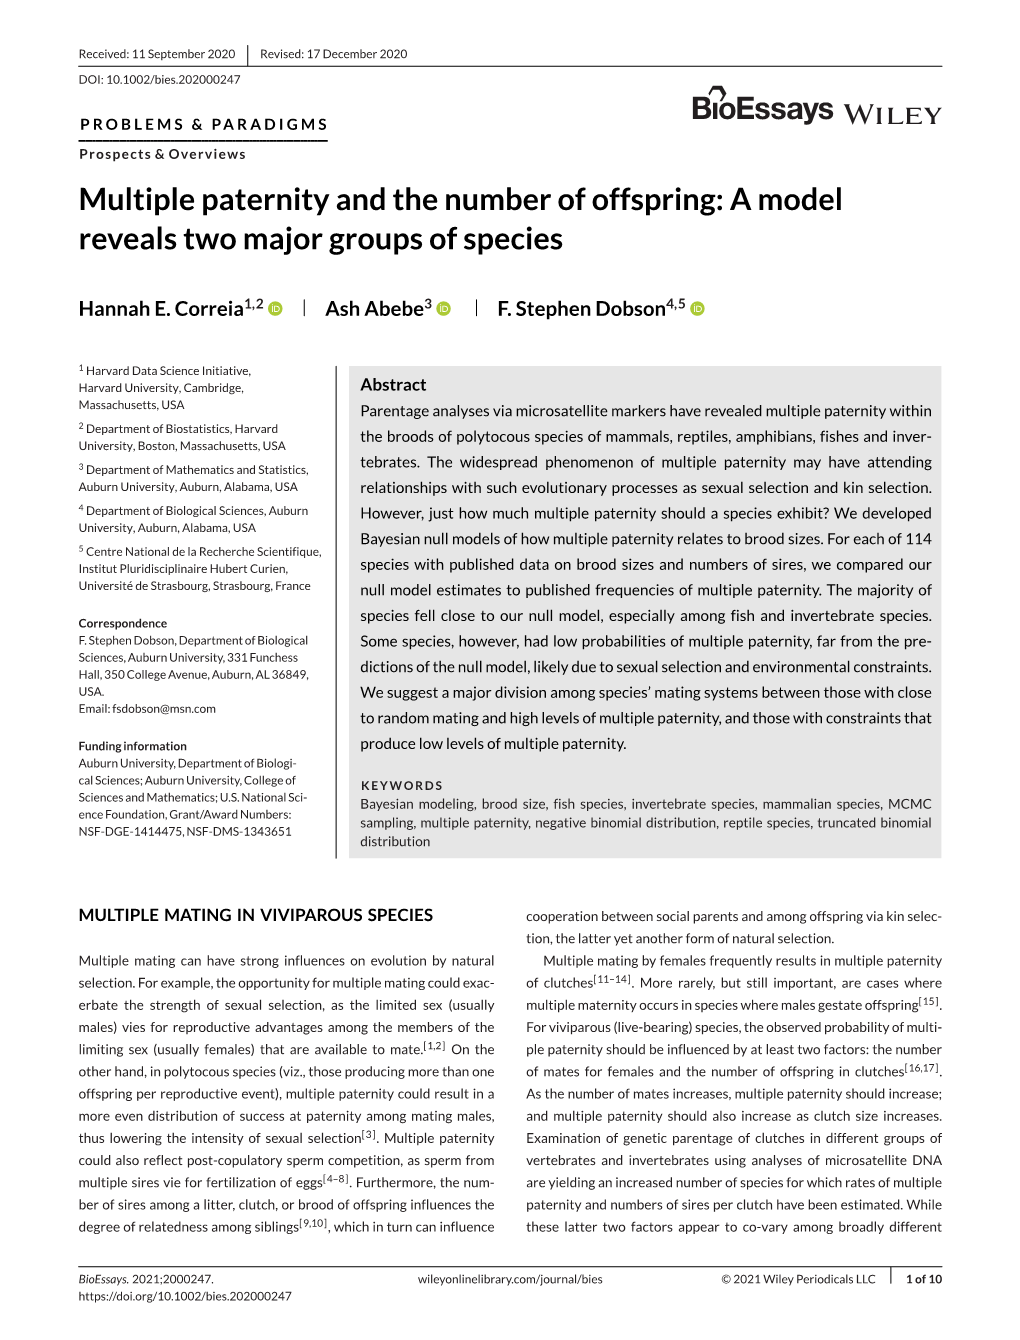 Multiple Paternity and the Number of Offspring: a Model Reveals Two Major Groups of Species